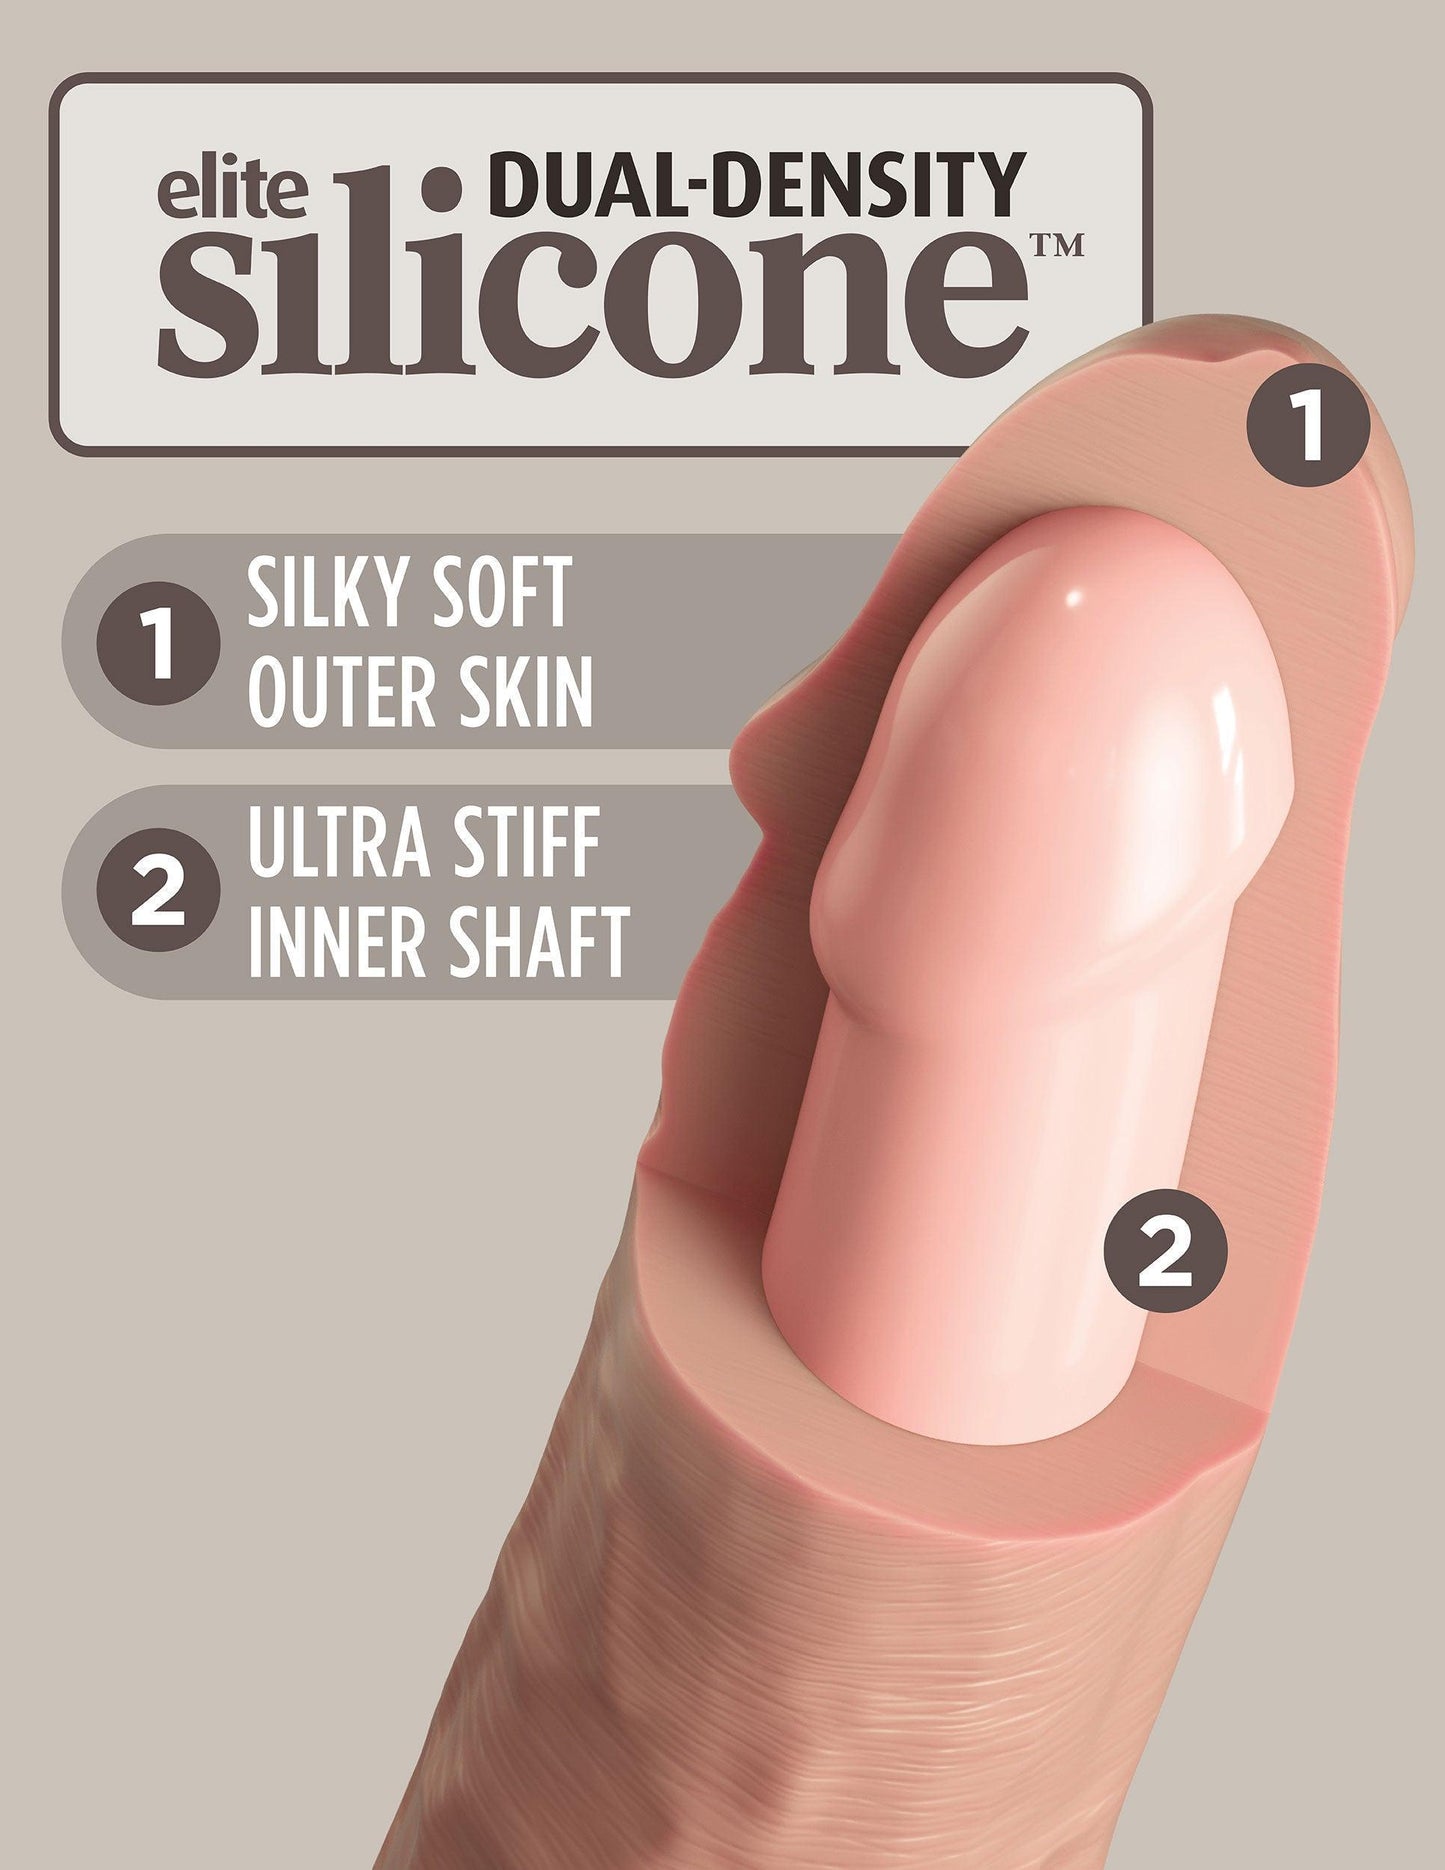 King Cock Elite Beginner's Silicone Body Dock Kit - Harness and 6 Inch Dildo - Light - My Sex Toy Hub